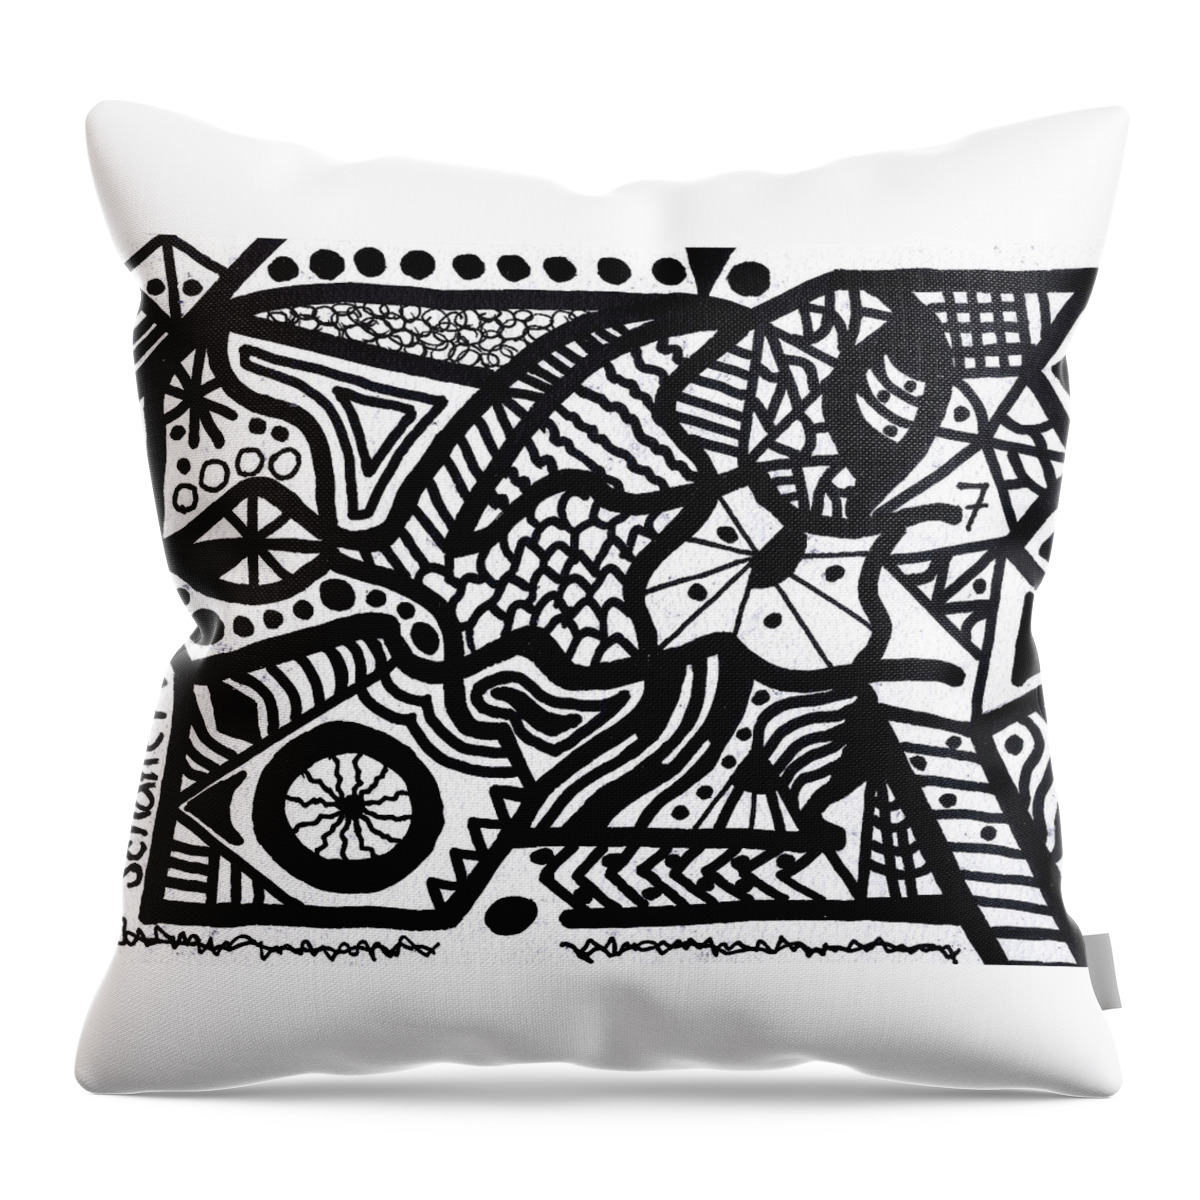 Original Art Throw Pillow featuring the drawing Black and White 7 by Susan Schanerman